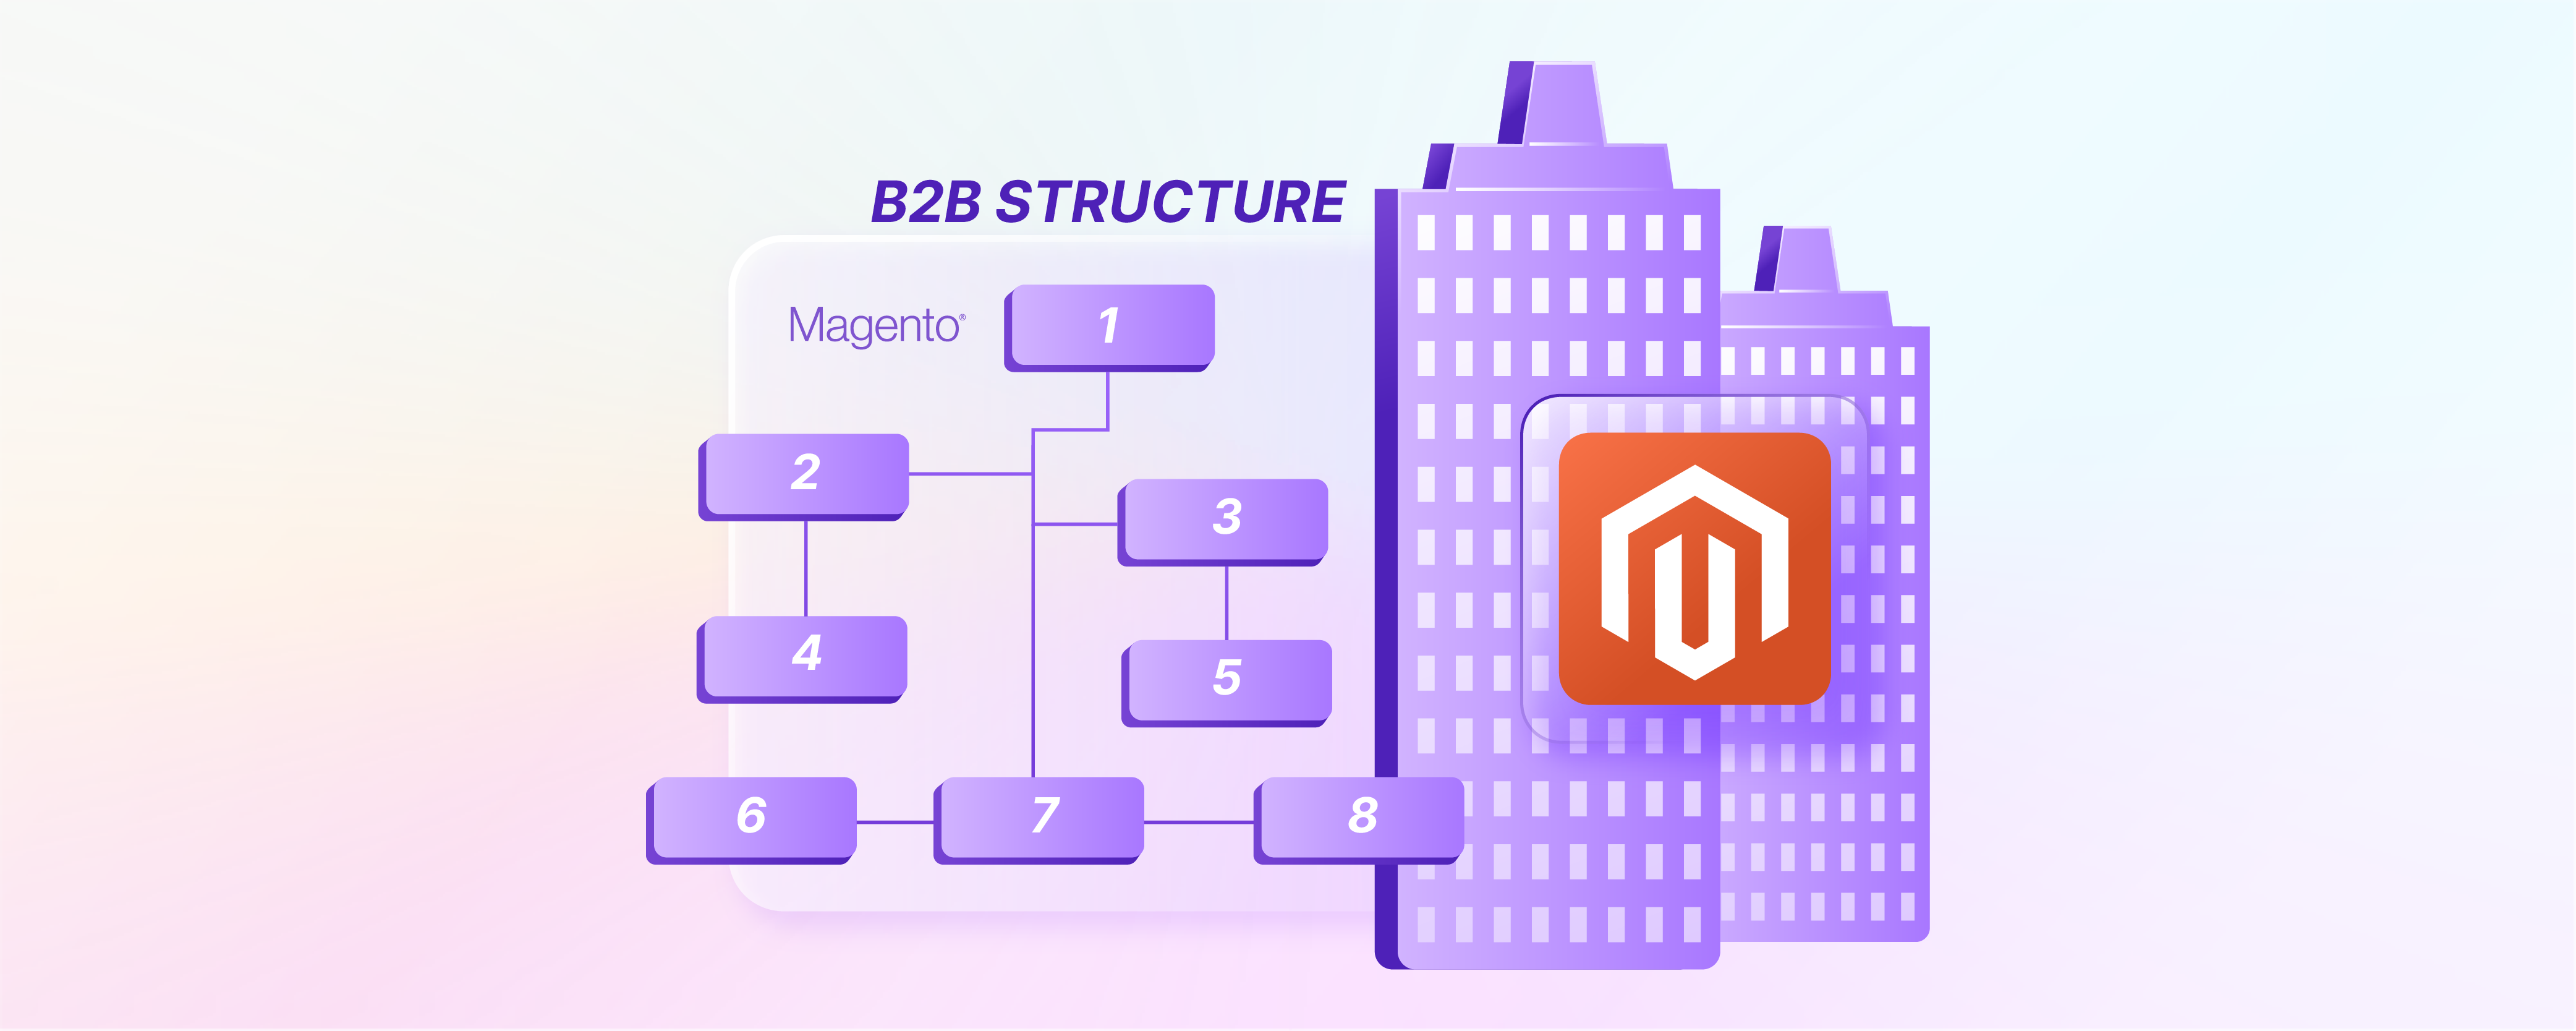 Magento 2 B2B Company Structure: Manage Hierarchy